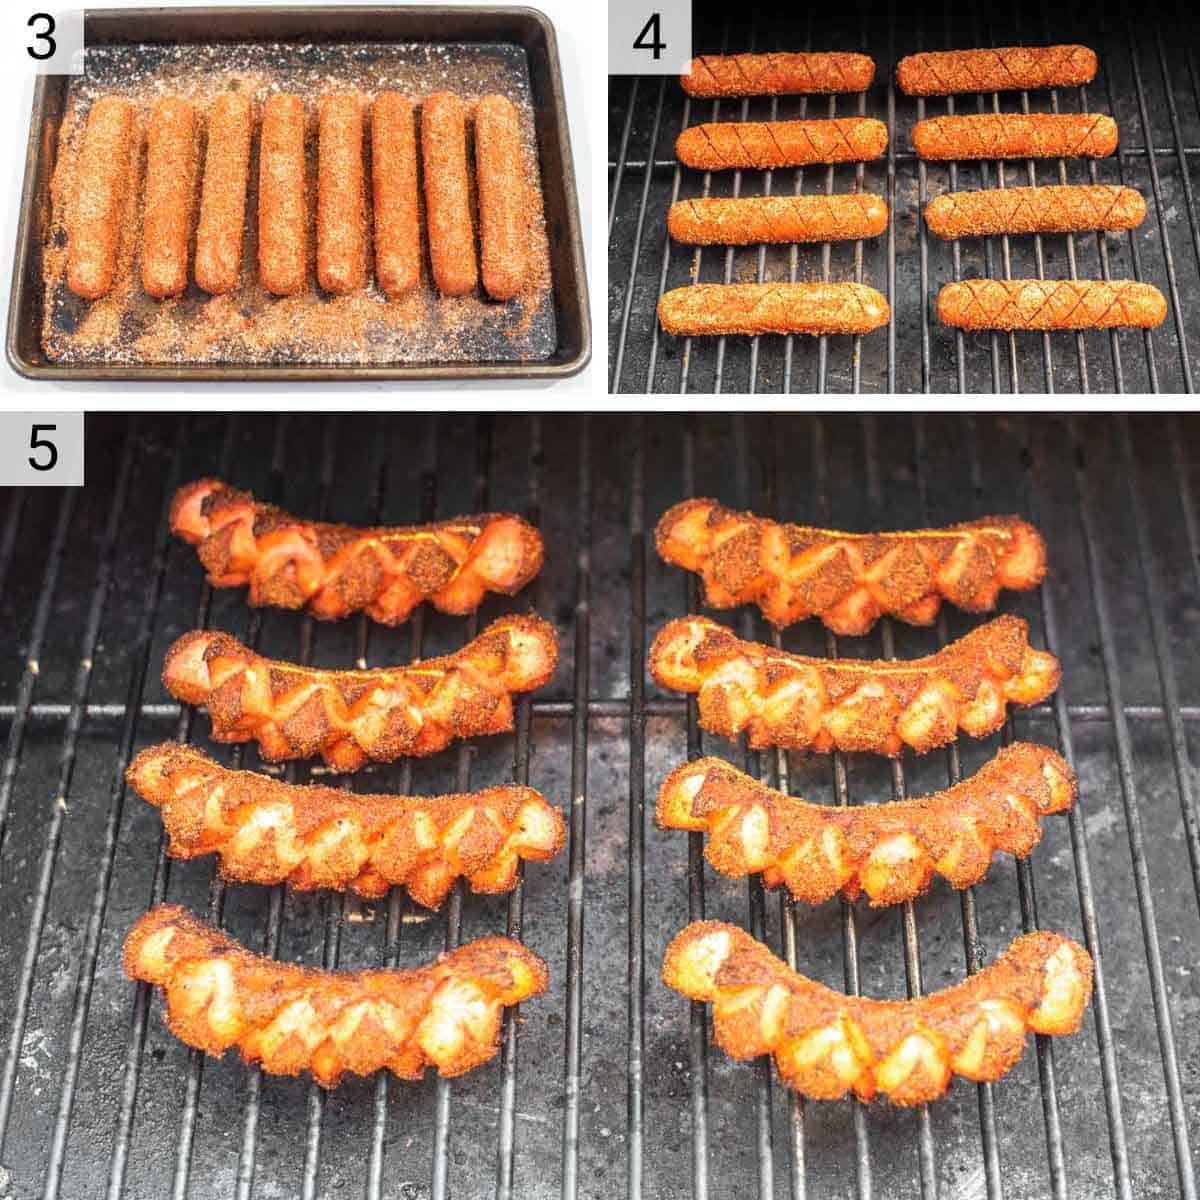 process shots of tossing hot dogs in spices and smoking